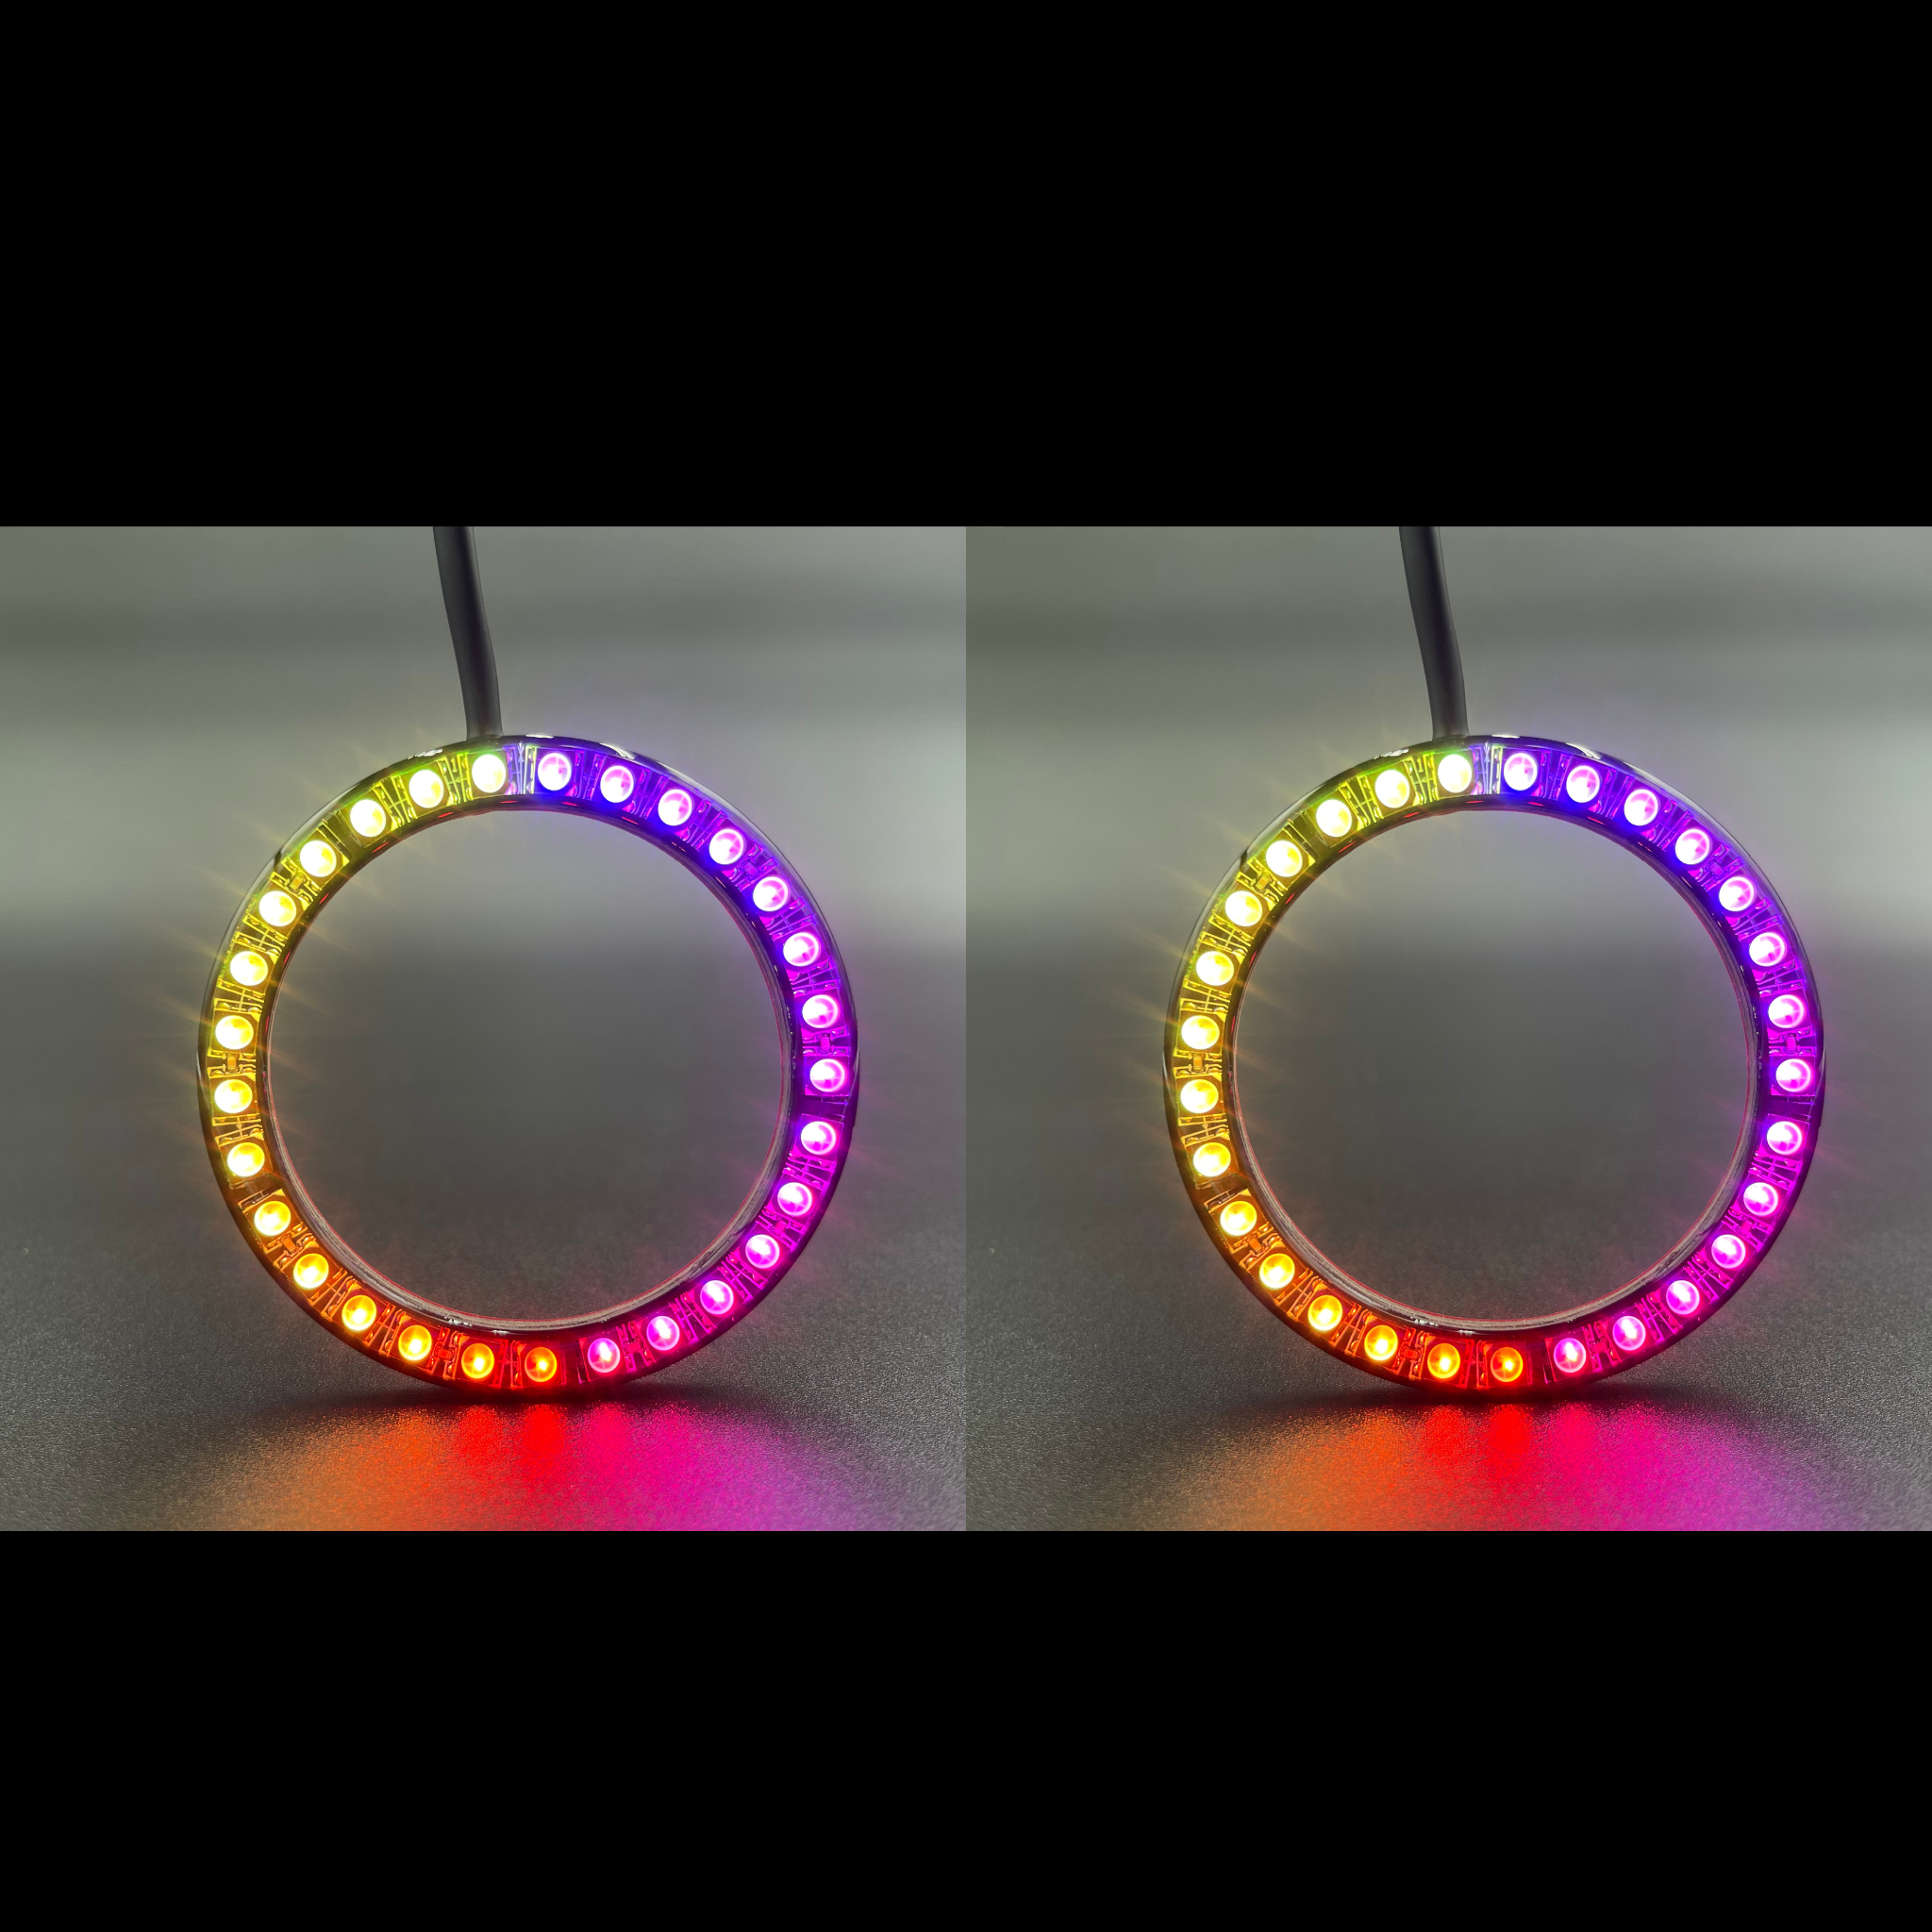 2005-2007 Ford Focus Multicolor Halo Kit - RGB Halo Kits Multicolor Flow Series Color Chasing RGBWA LED headlight kit Oracle Lighting Trendz OneUpLighting Morimoto theretrofitsource AutoLEDTech Diode Dynamics